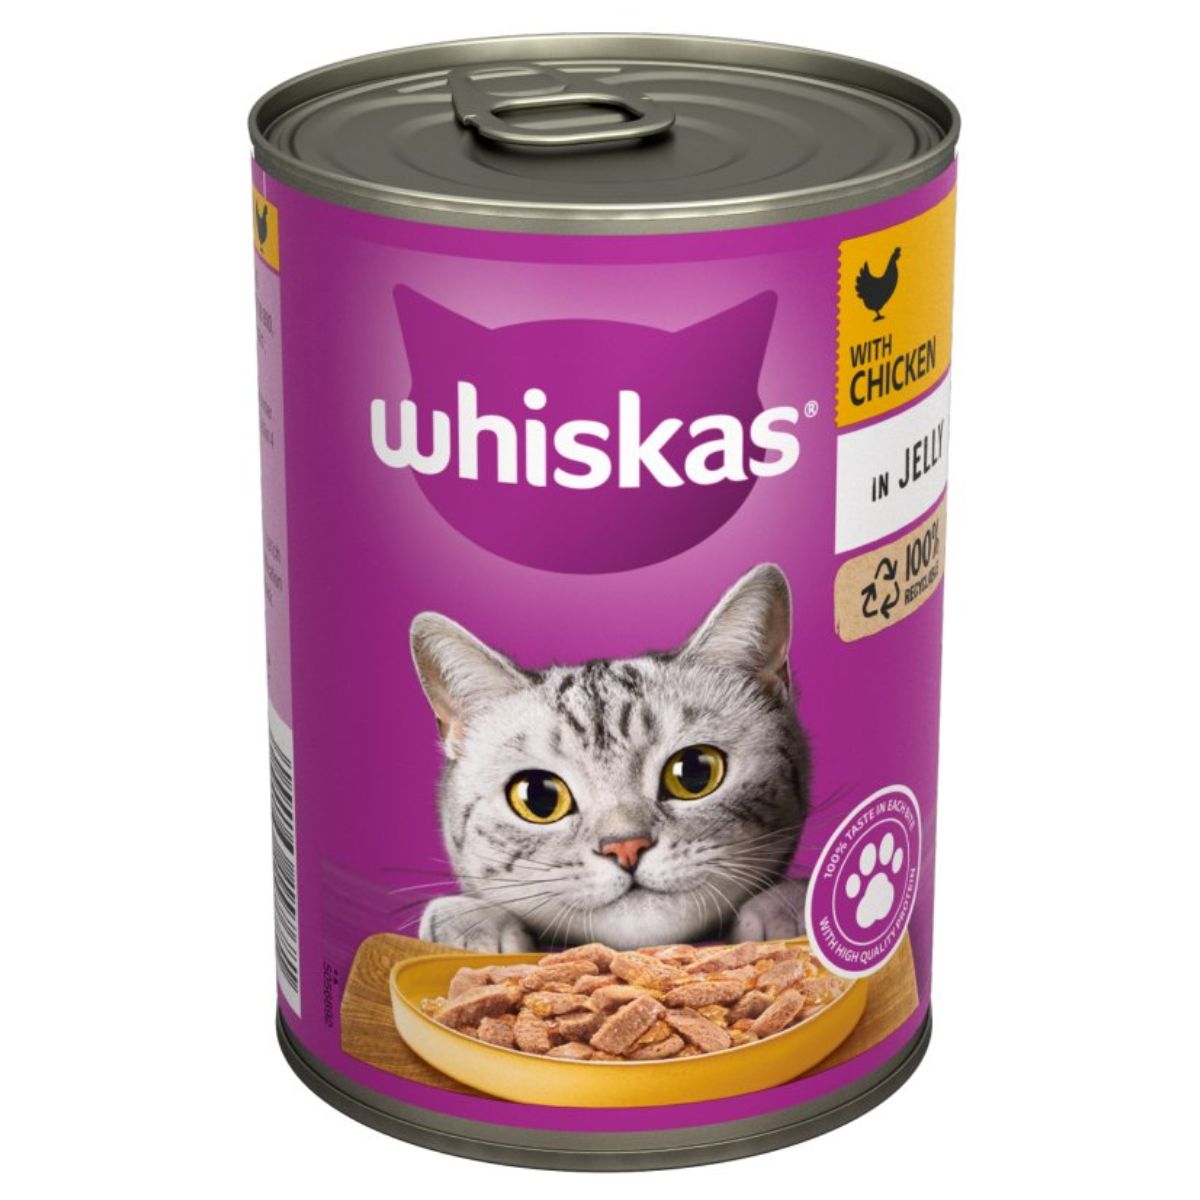 Whiskas - Chicken in Jelly - 400g cat food in a can.